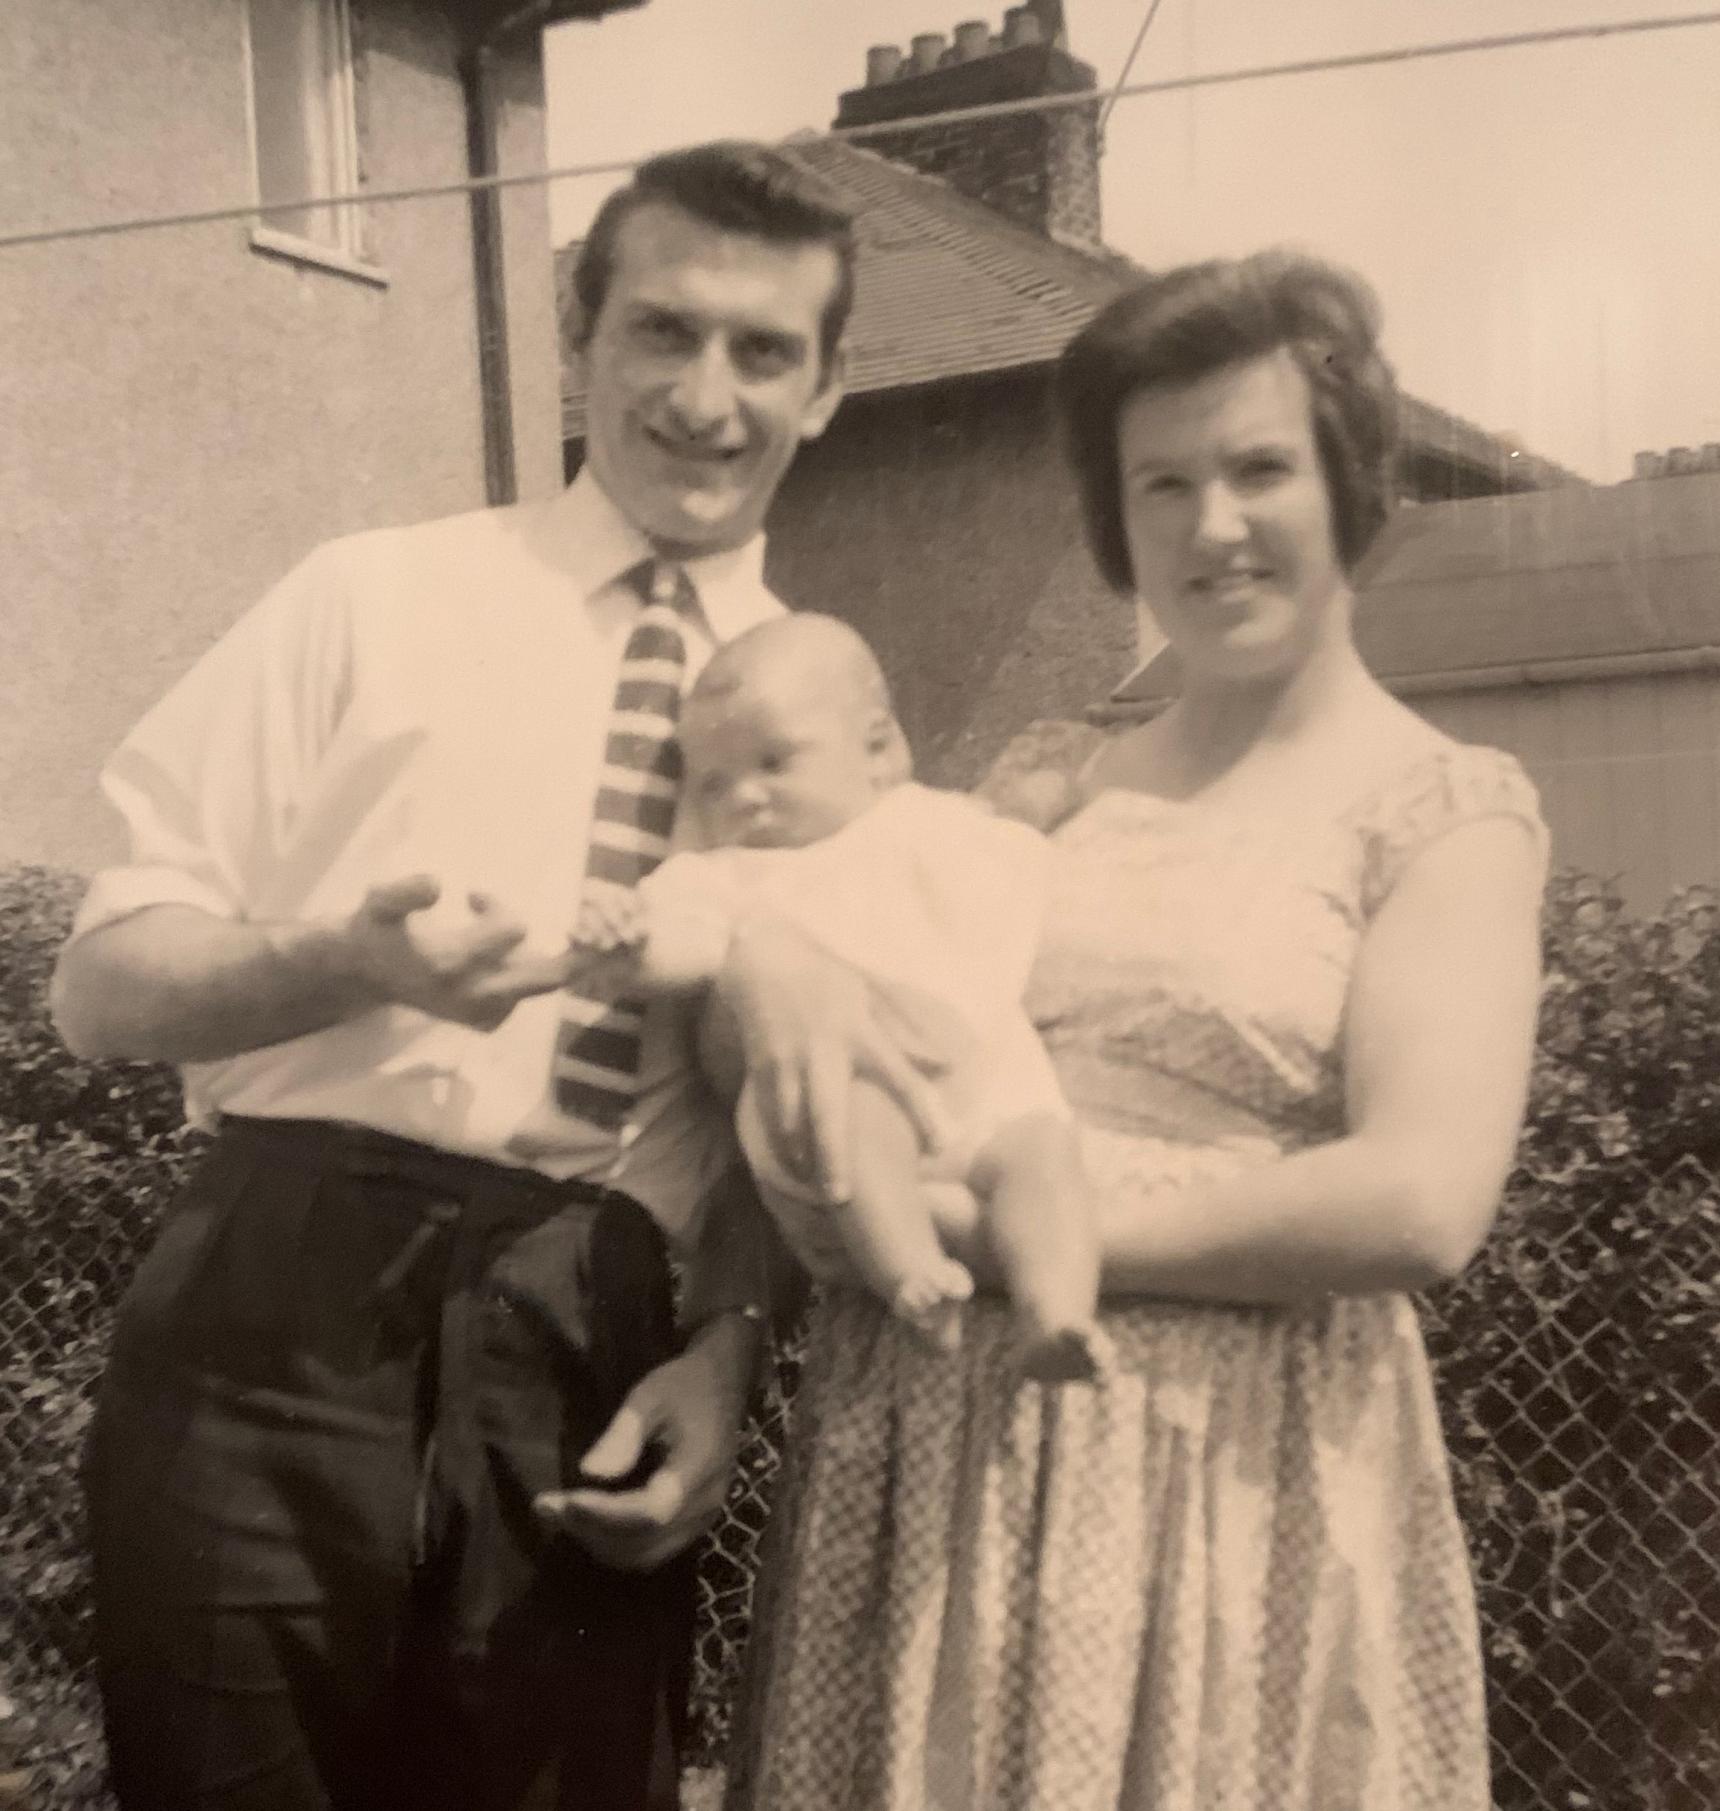 A younger John with his wife, and Tom's uncle as a baby